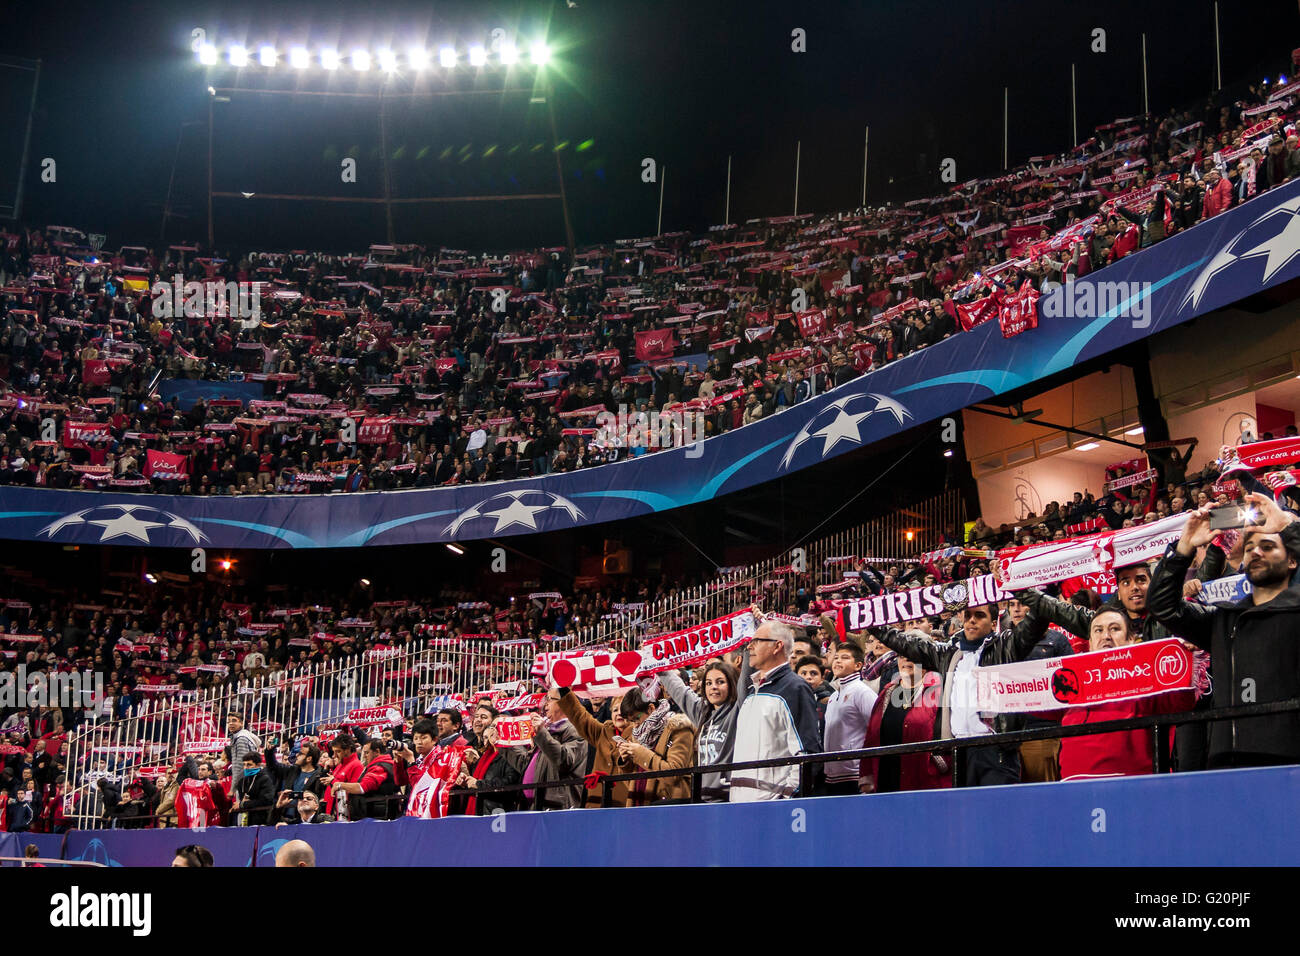 Supporters of Sevilla before the UEFA Champions League Group D soccer match between Sevilla FC and Juventus at Estadio Ramon Sanchez Pizjuan in Sevilla, Spain, 8 December, 2015 Stock Photo